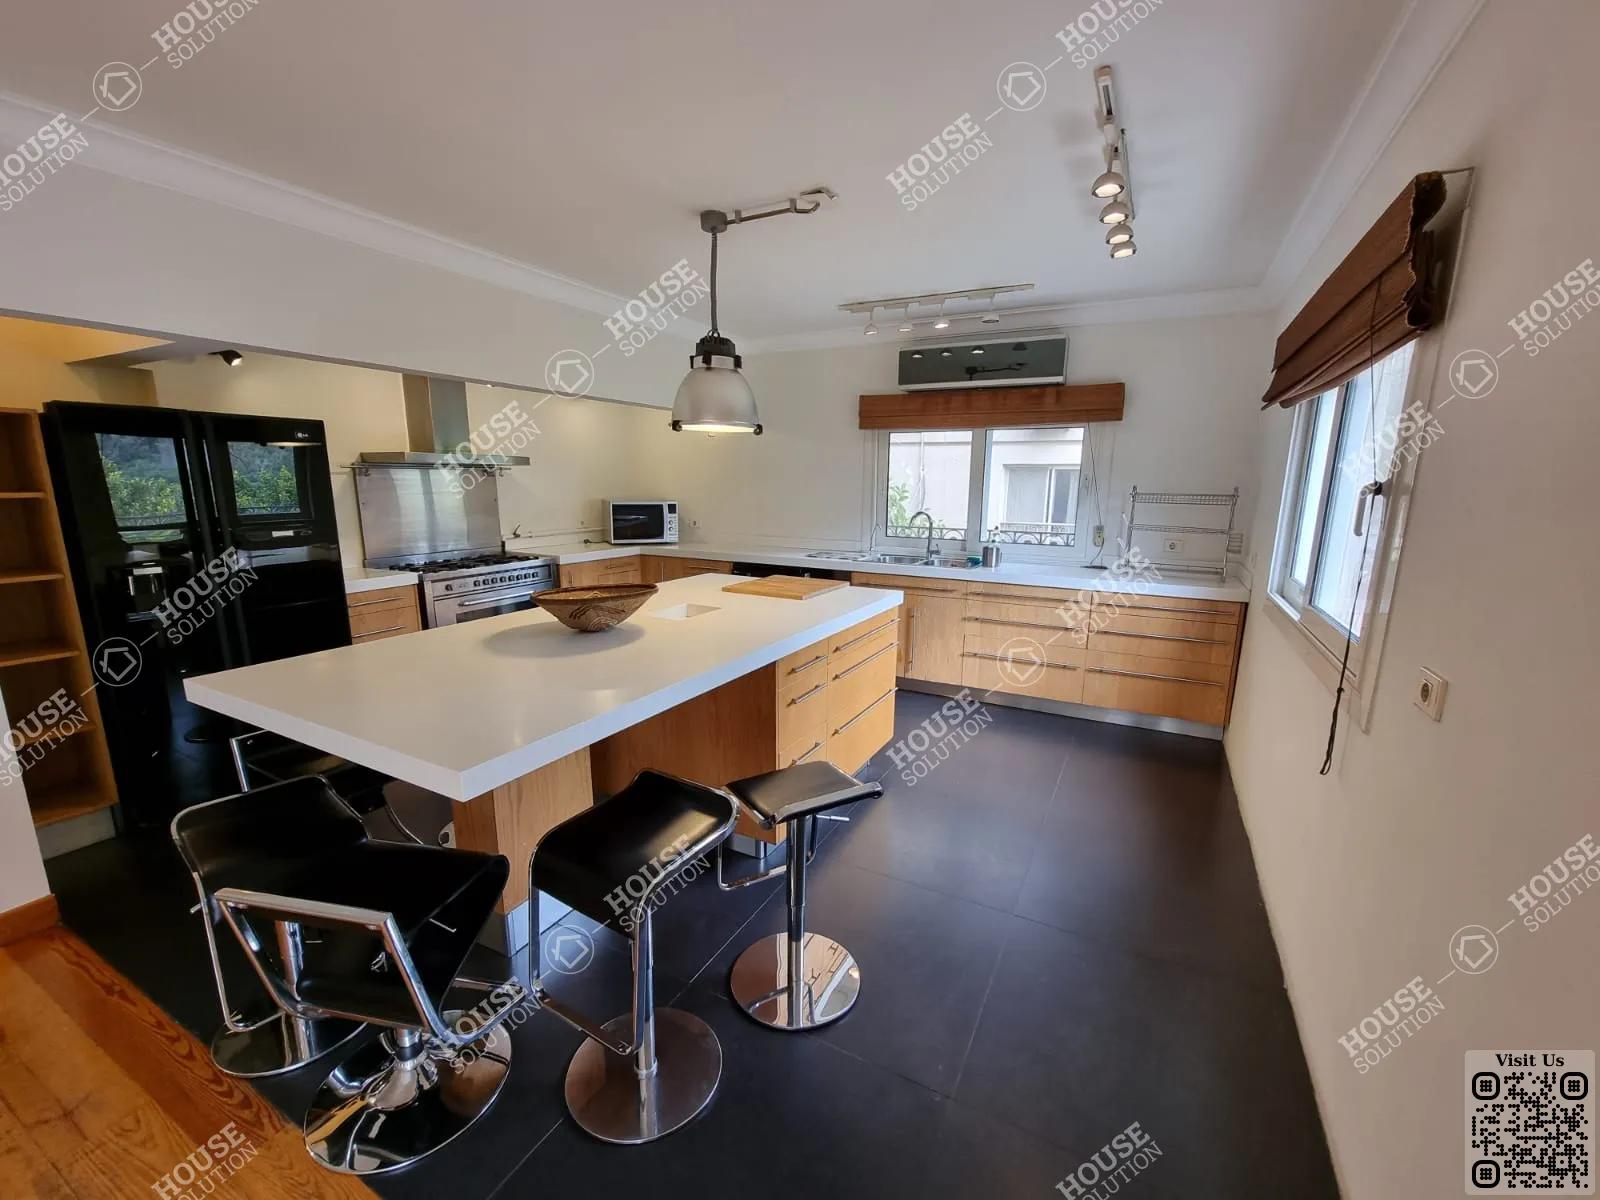 KITCHEN  @ Apartments For Rent In Maadi Maadi Degla Area: 160 m² consists of 2 Bedrooms 2 Bathrooms Furnished 5 stars #2868-1